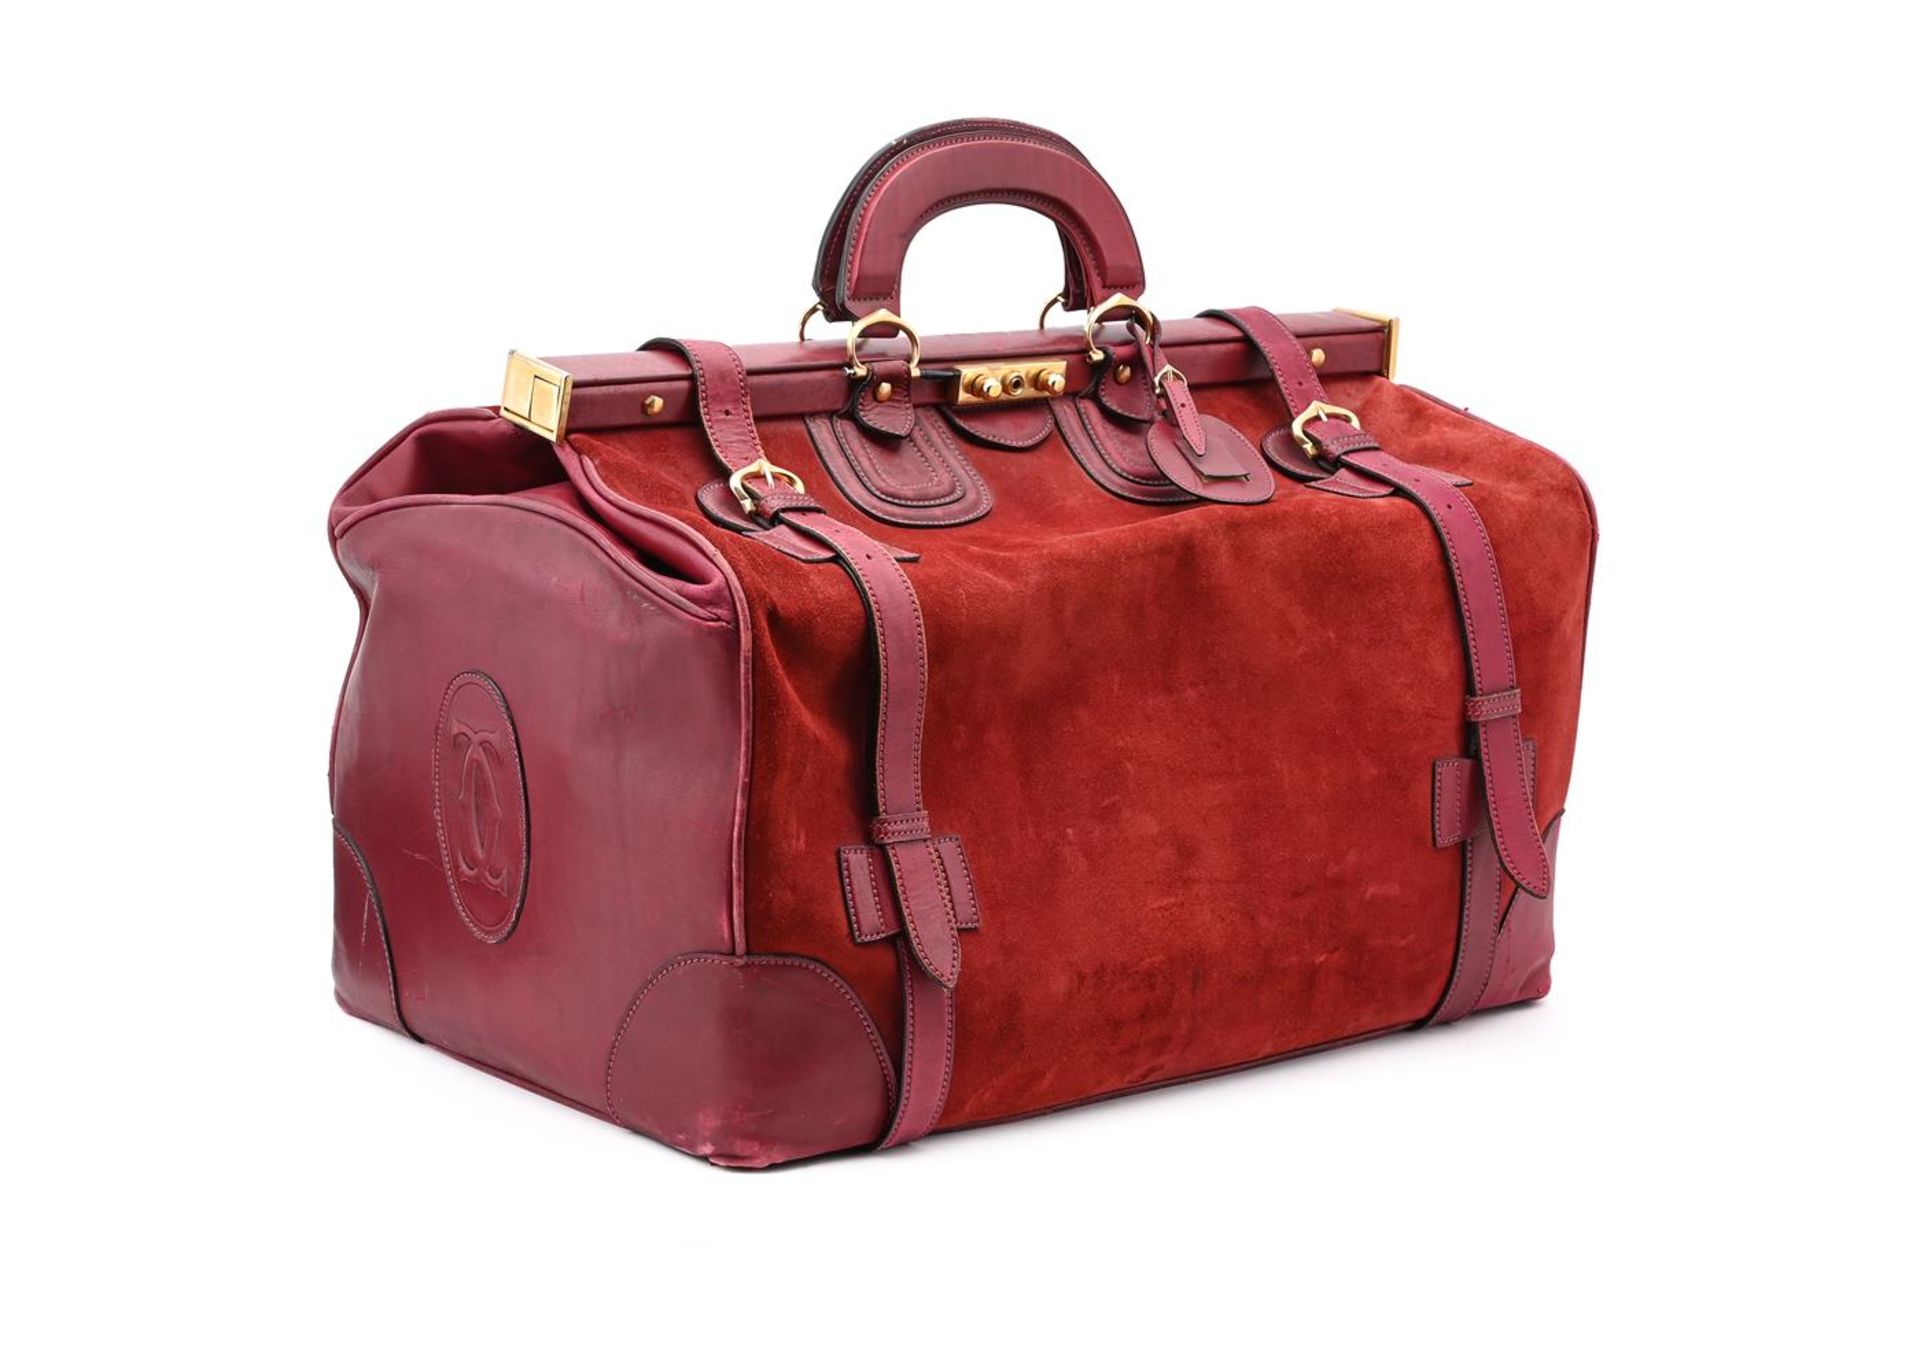 CARTIER, A BURGUNDY LEATHER AND SUEDE DOCTOR'S BAG